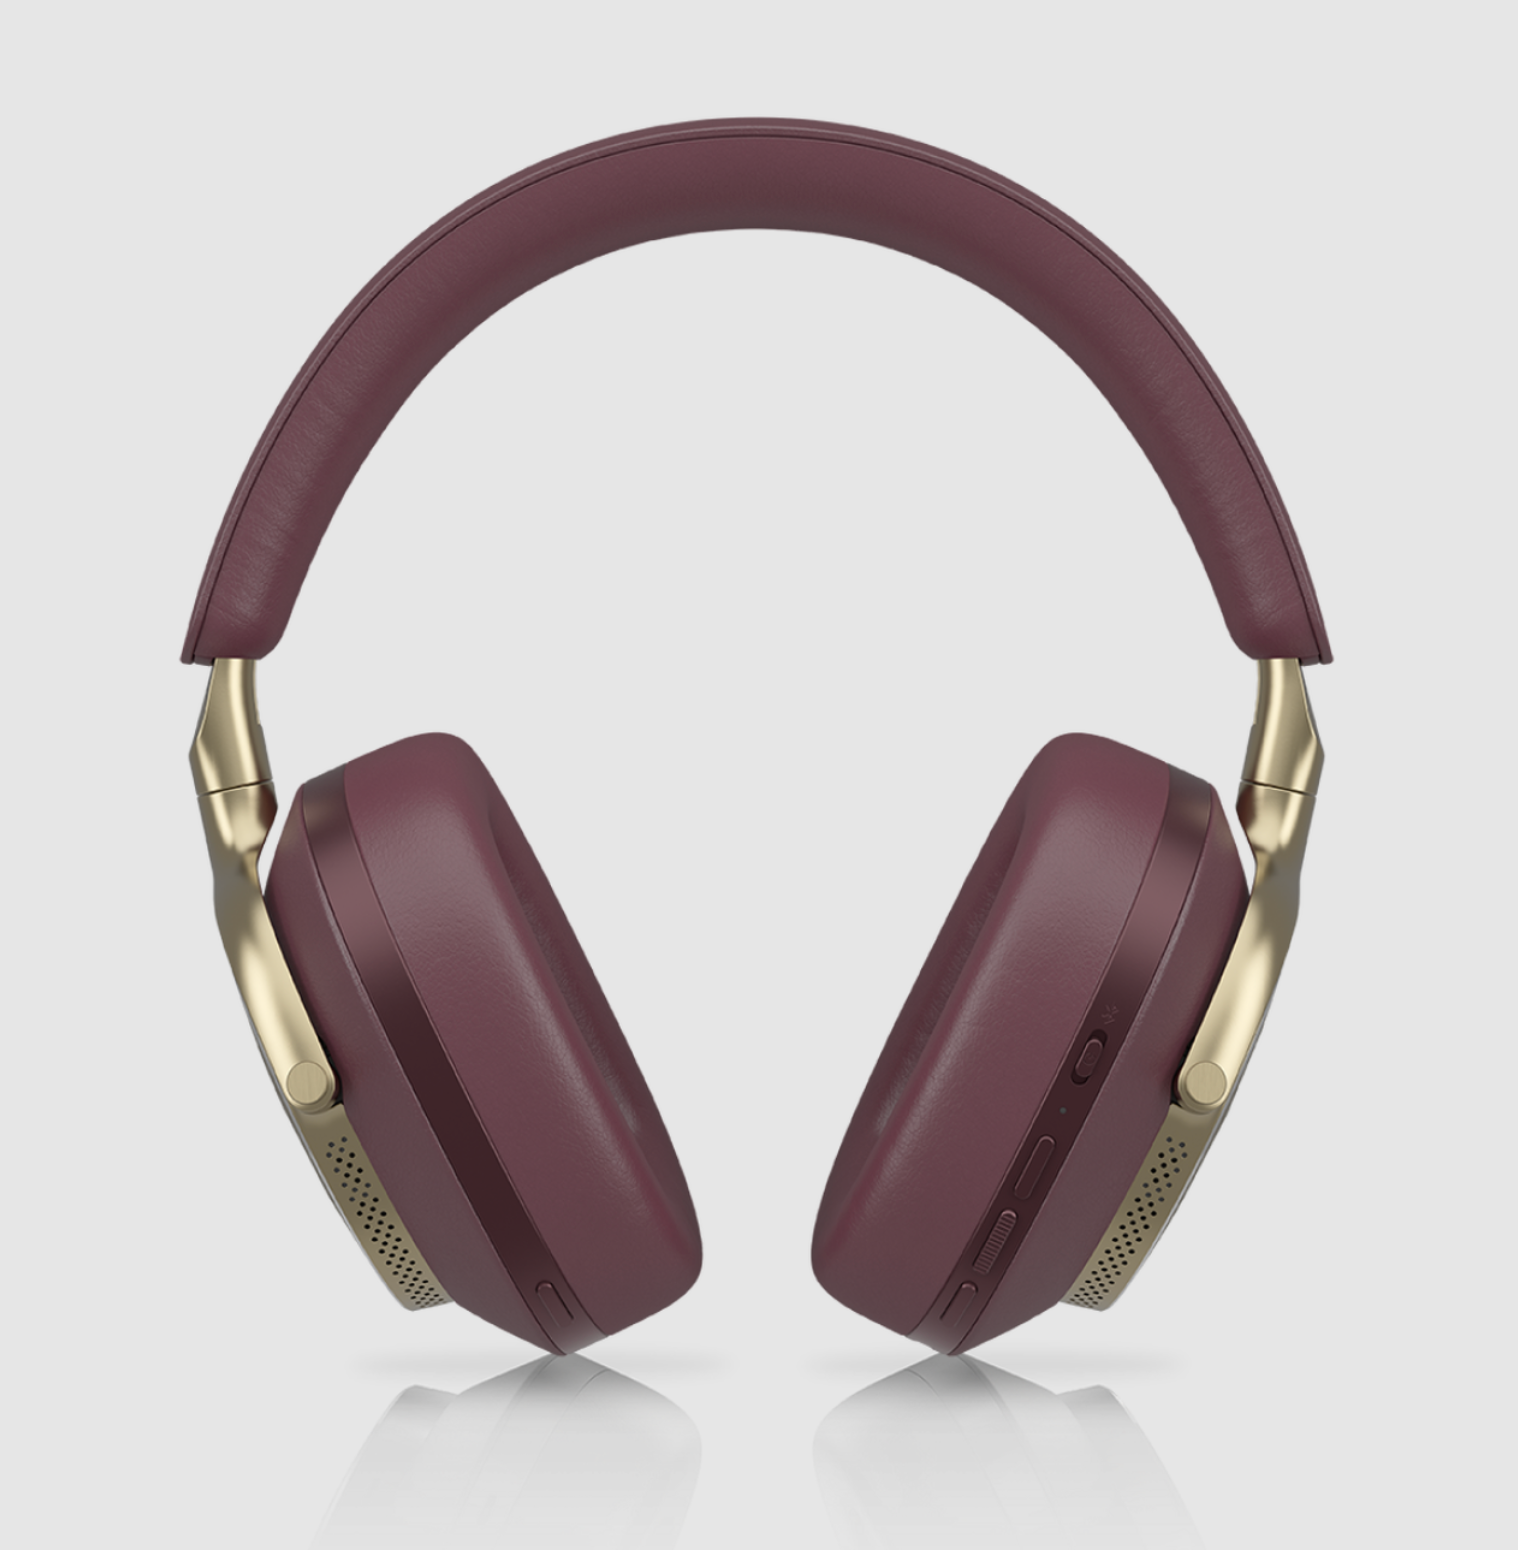 B&W Px8 Noise Cancelling Headphones in Royal Burgundy. Image of controls